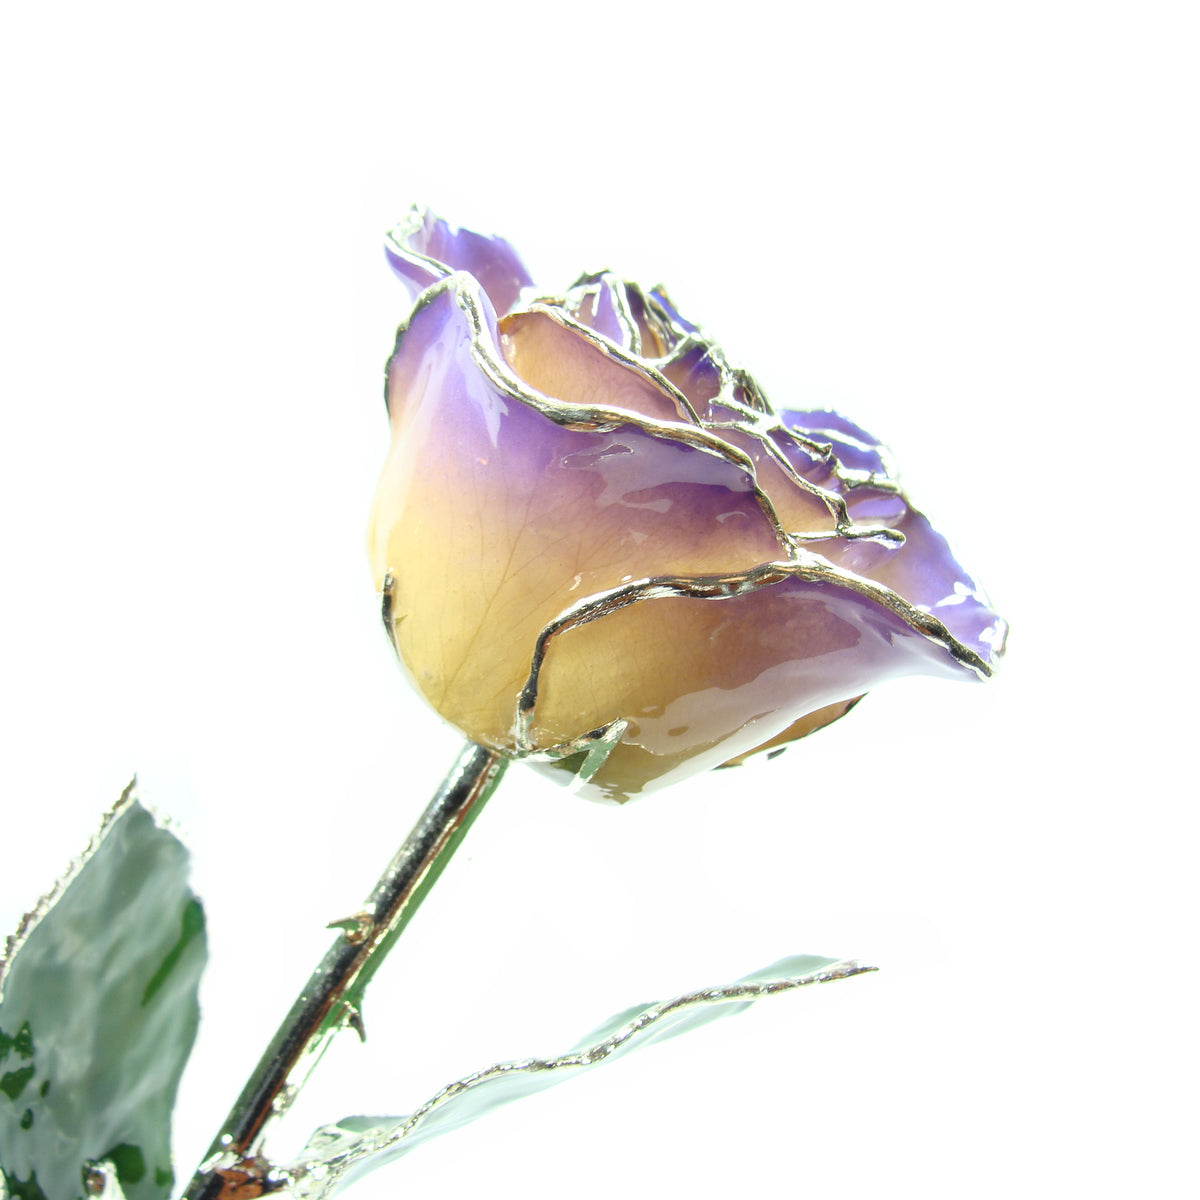 Silver Trimmed Forever Rose with White and Purple Petals. View of Stem, Leaves, and Rose Petals and Showing Detail of Silver Trim